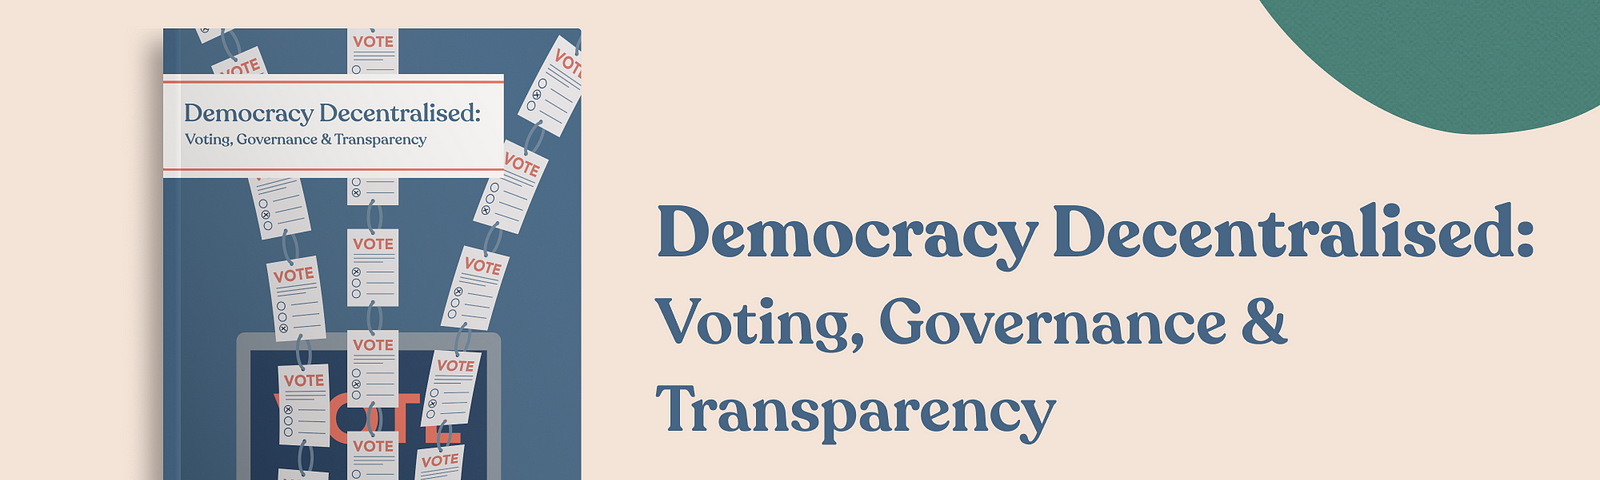 “Democracy Decentralised: Voting, Governance & Transparency” book with votes going to a computer on tan background with blobs